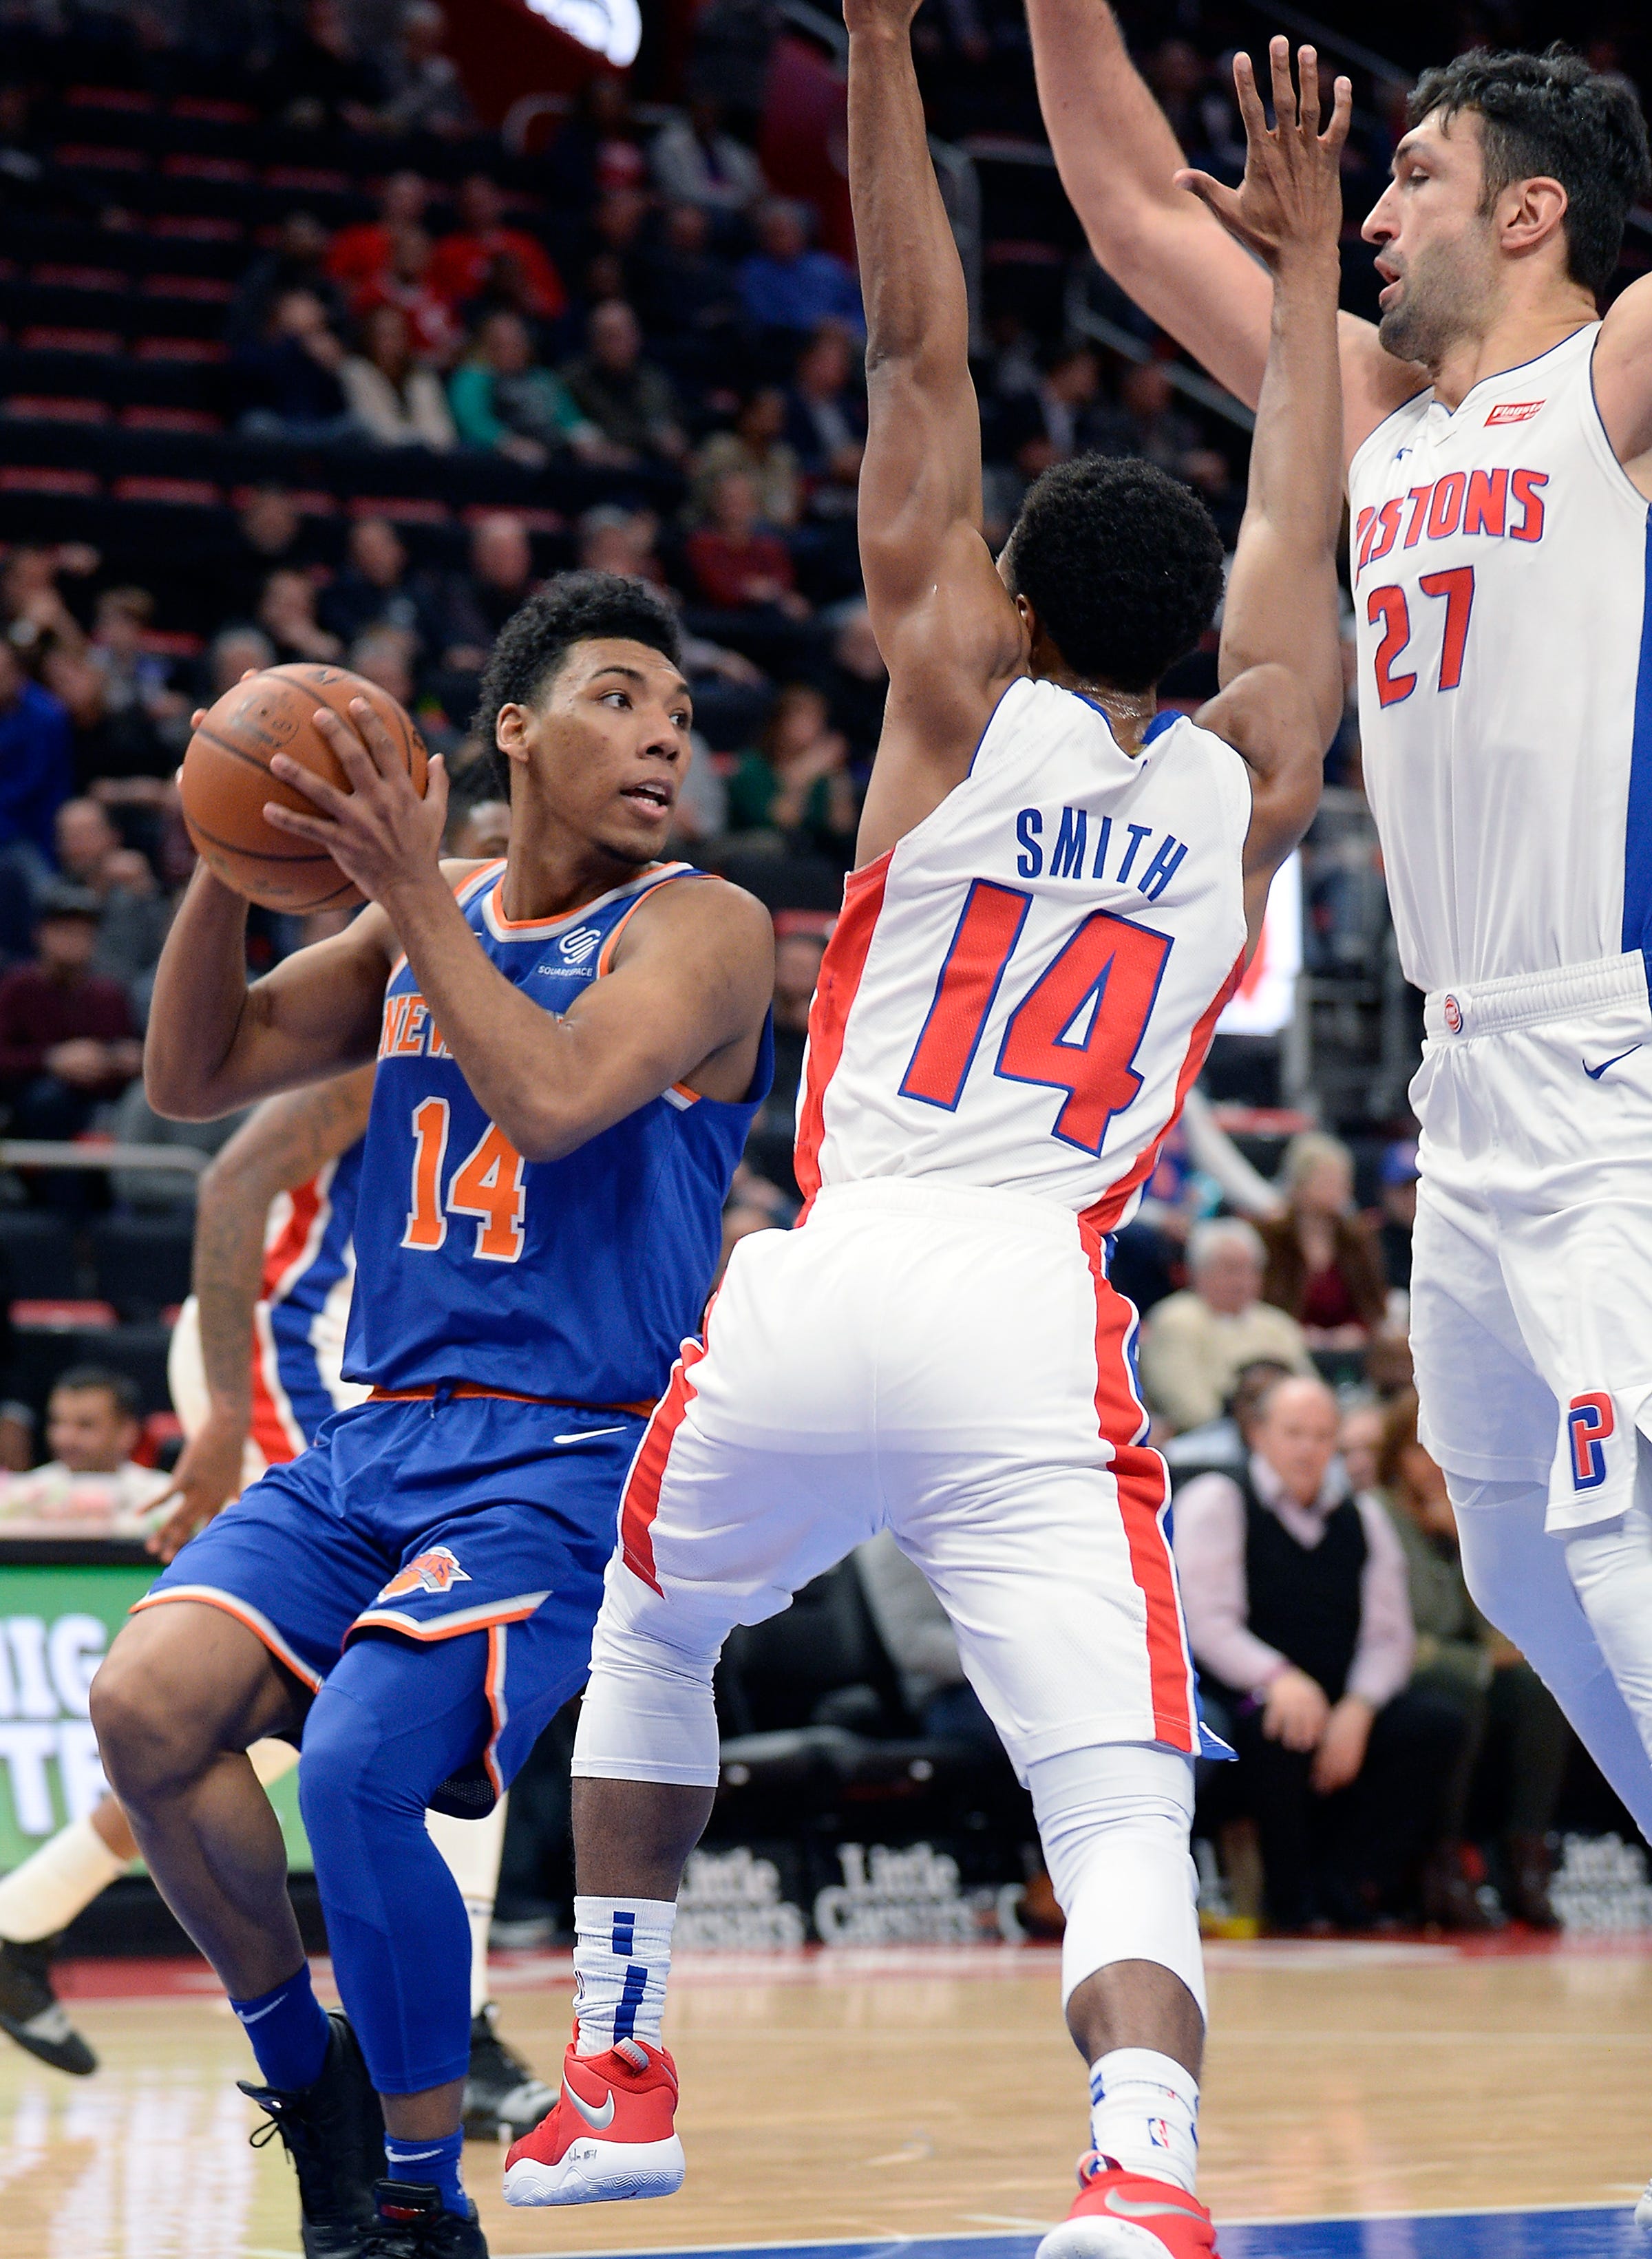 Knicks' Allonzo Trier looks for room around Pistons' Ish Smith in the fourth quarter.